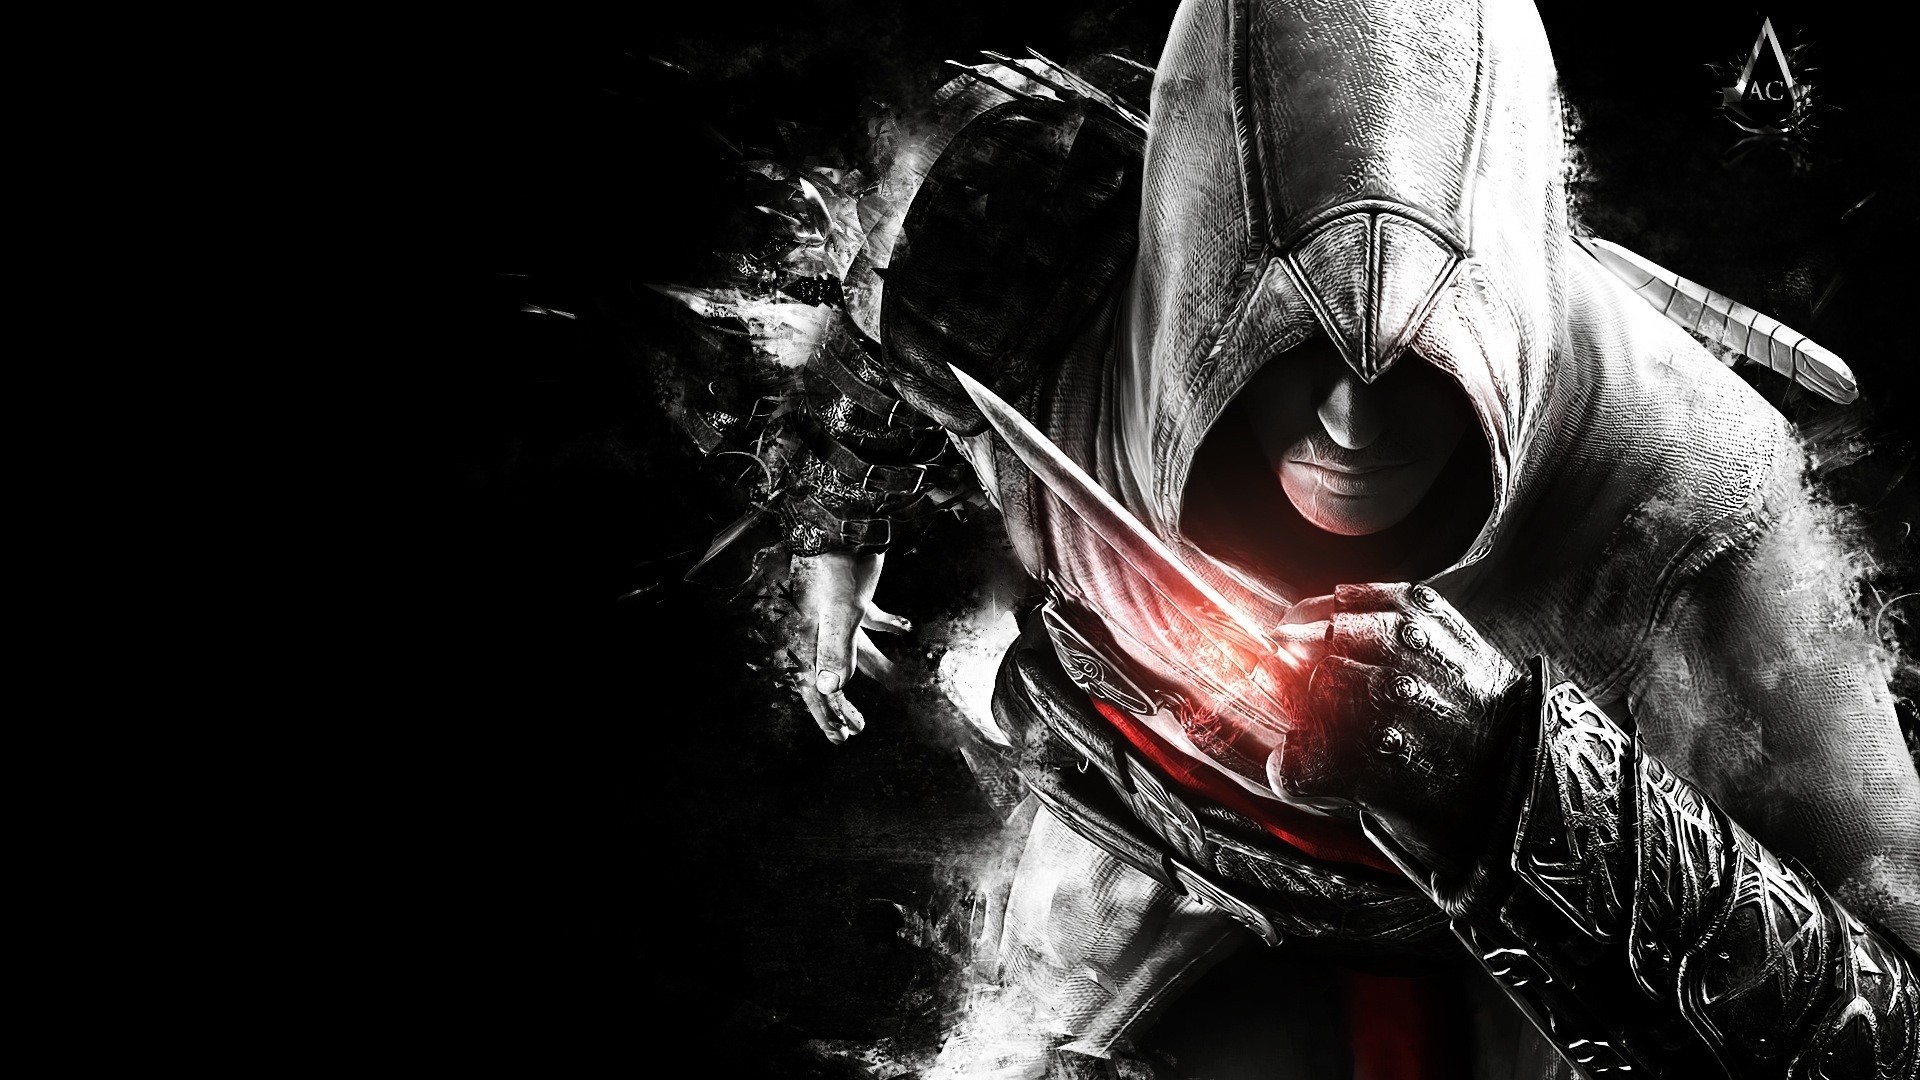 General 1920x1080 Assassin's Creed video games Video Game Heroes digital art video game art PC gaming selective coloring